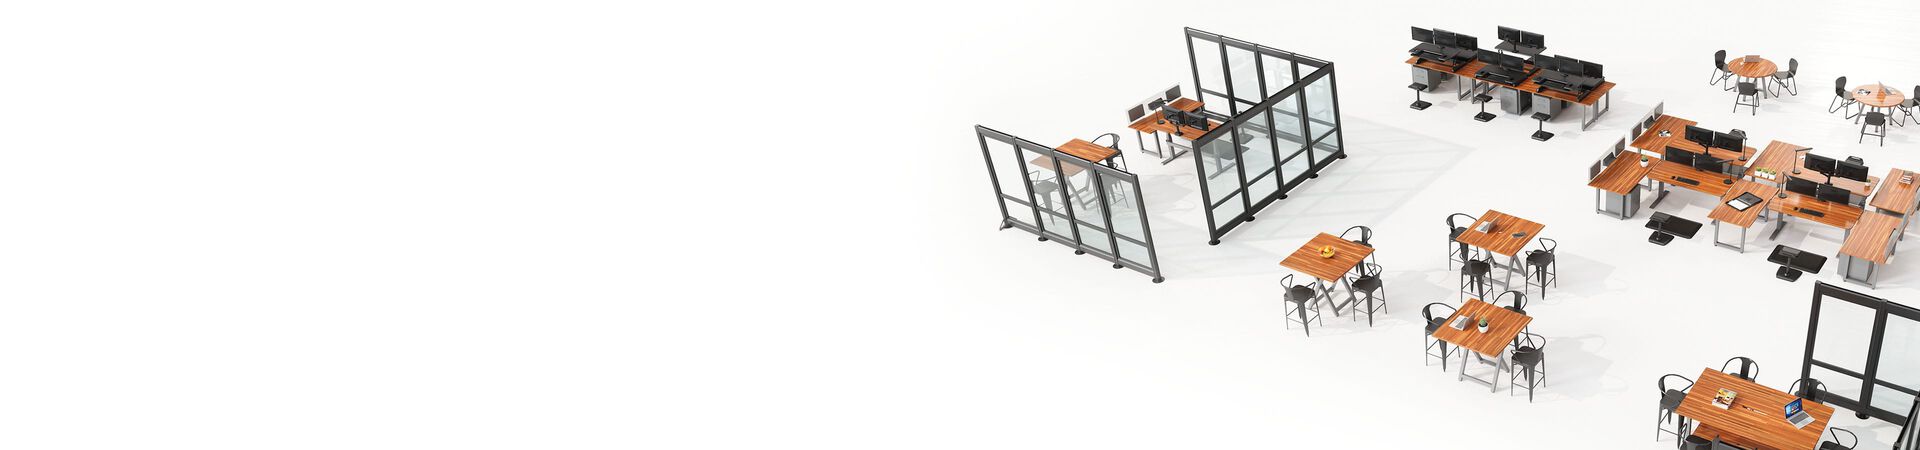 Open office as seen from above with Vari product